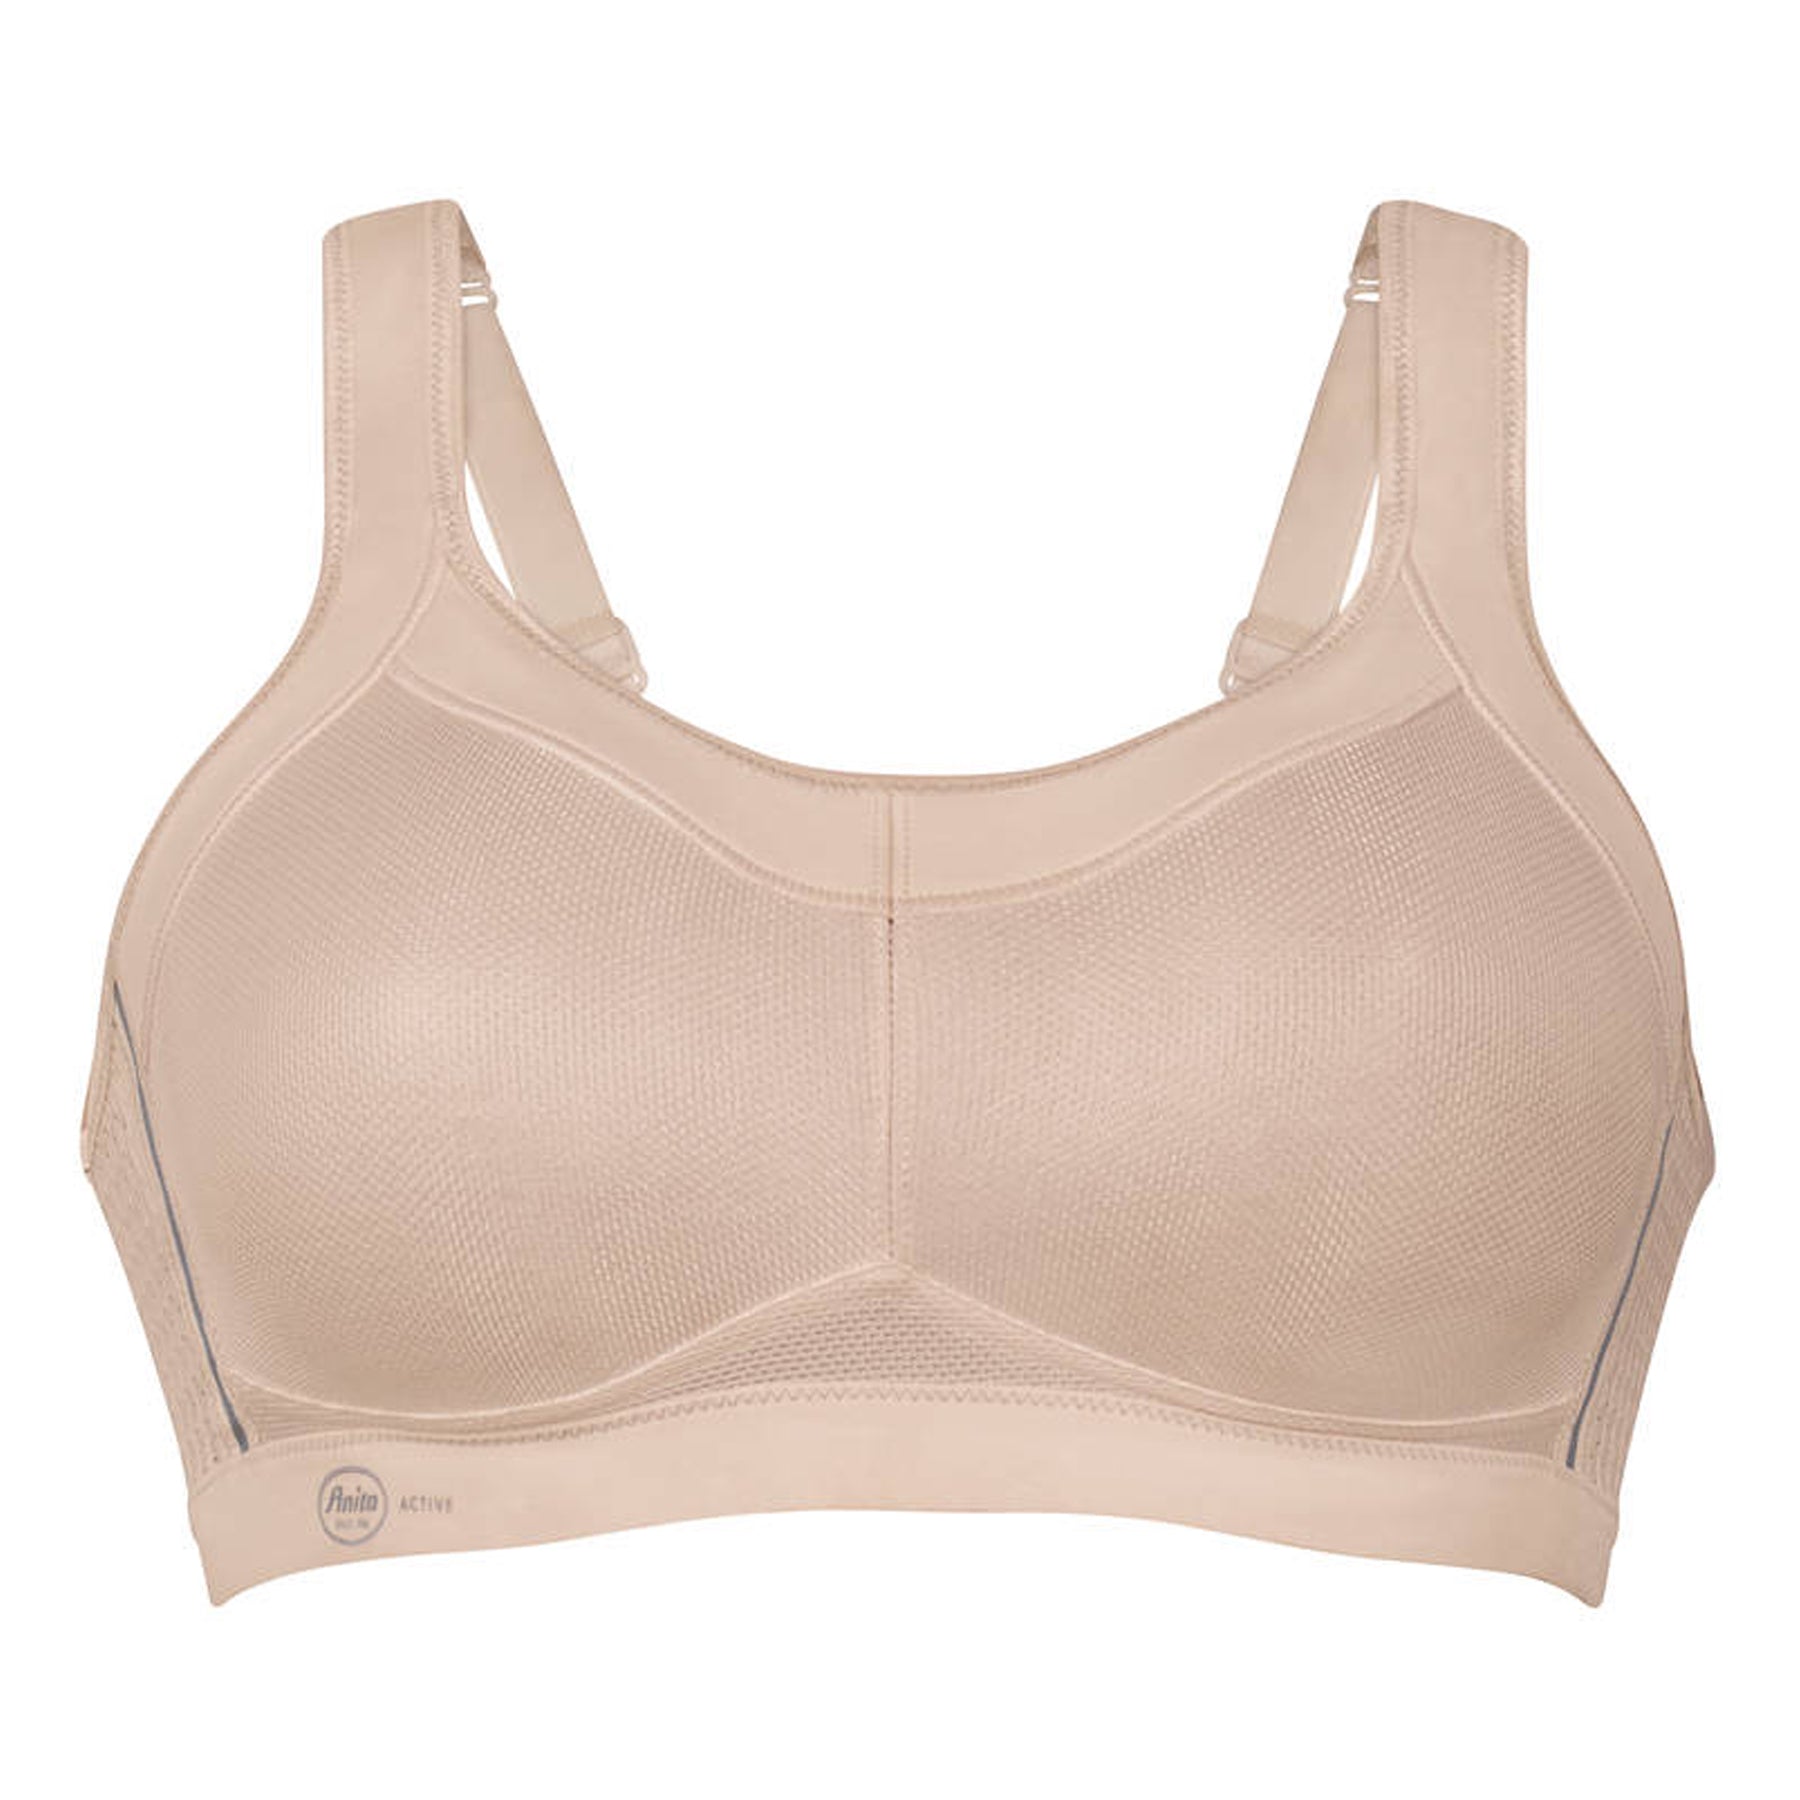 ❗10% OFF if you purchase in store today❗ OMG it's our favourite❤ Anyone  looking for a super comfy but also stylish sports bra? Then try this❗ You  can, By BraTopia